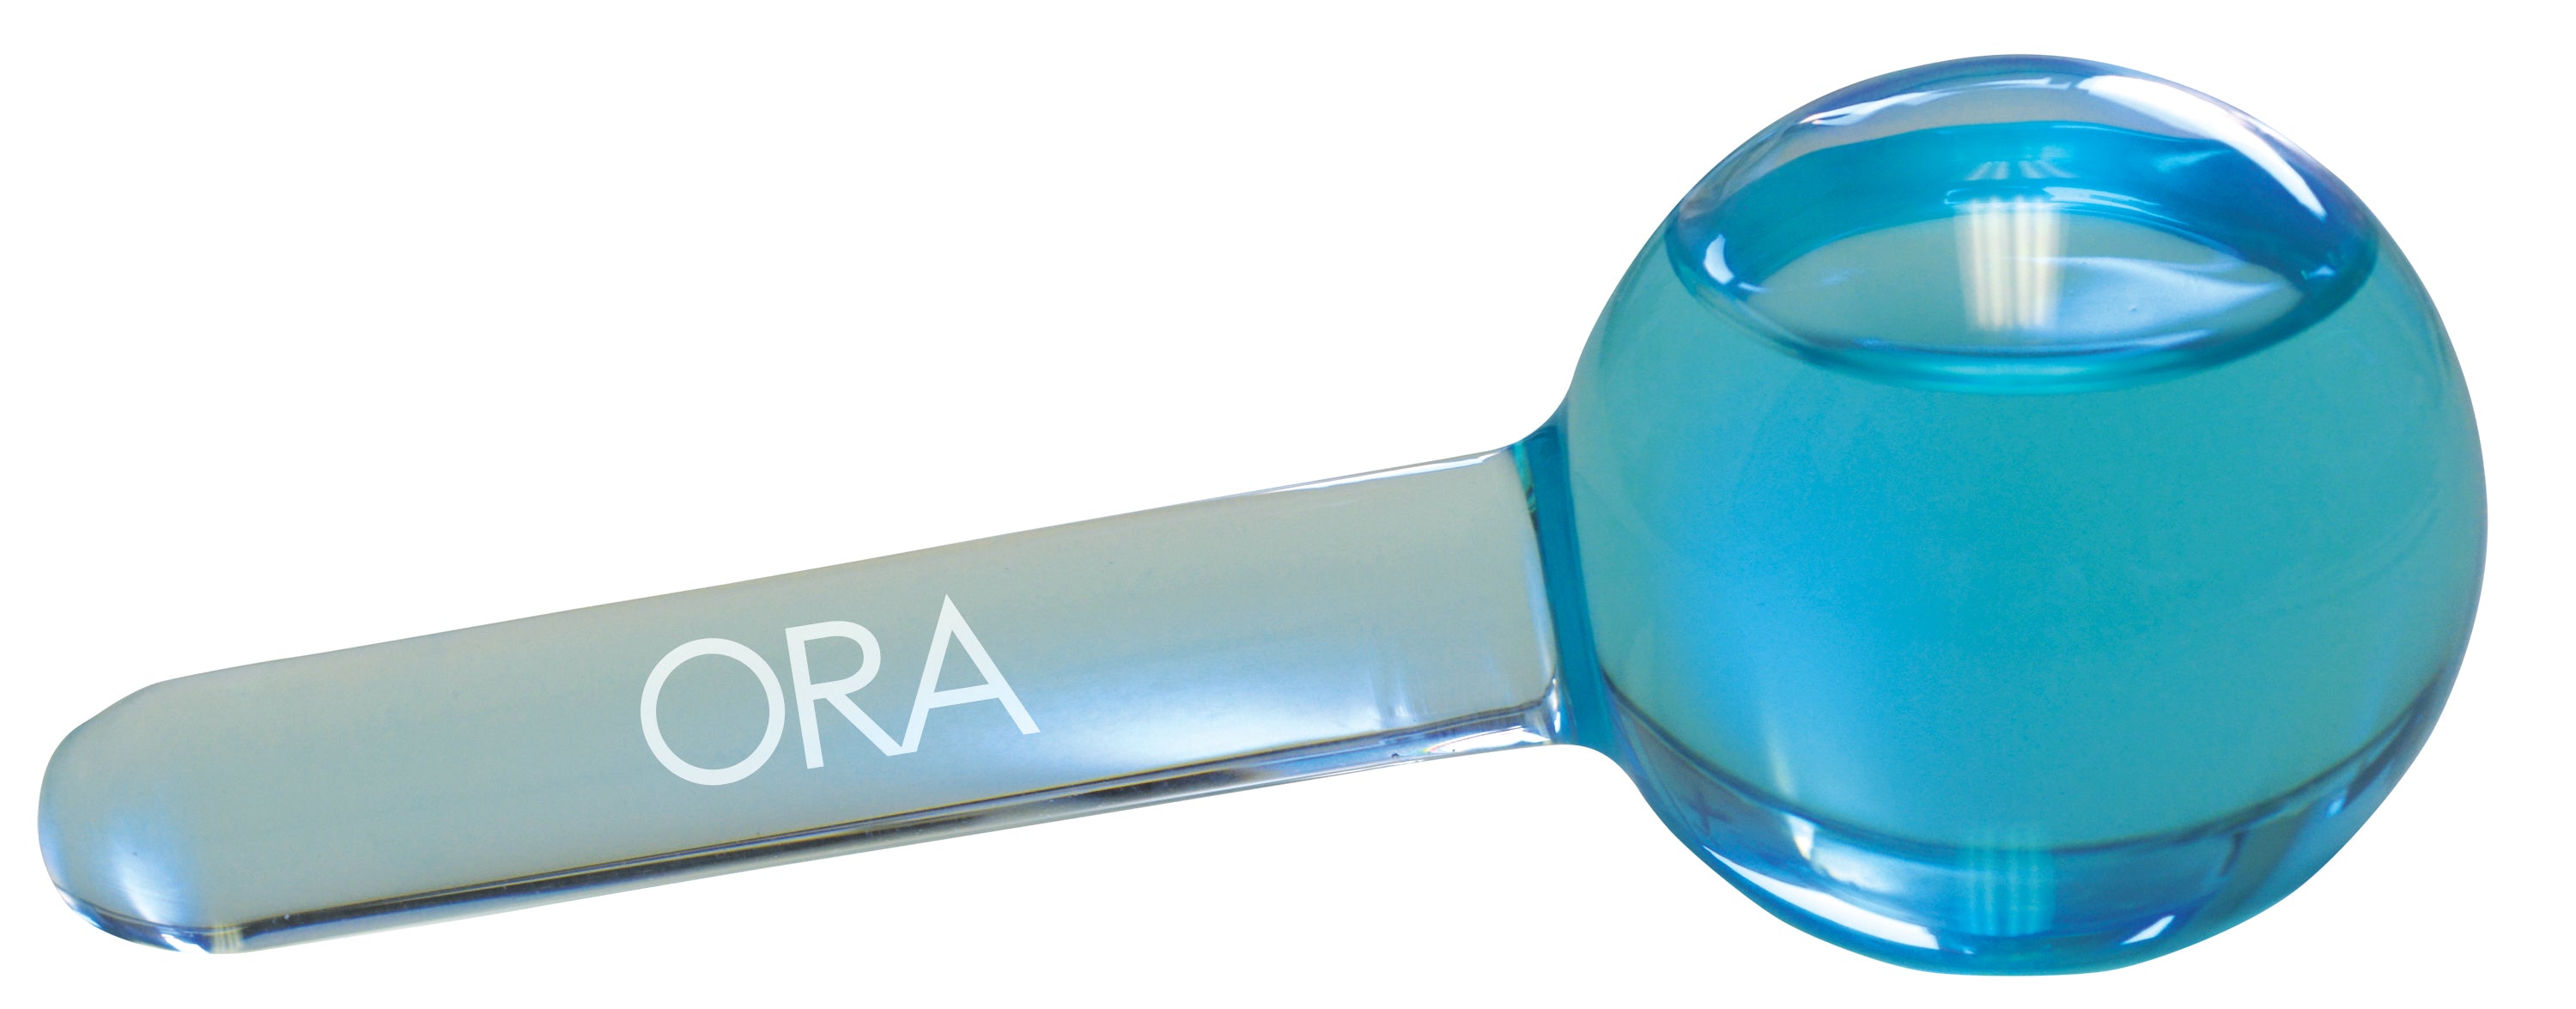 ORA Facial Cooling Ice Globes (Two-Piece Set)